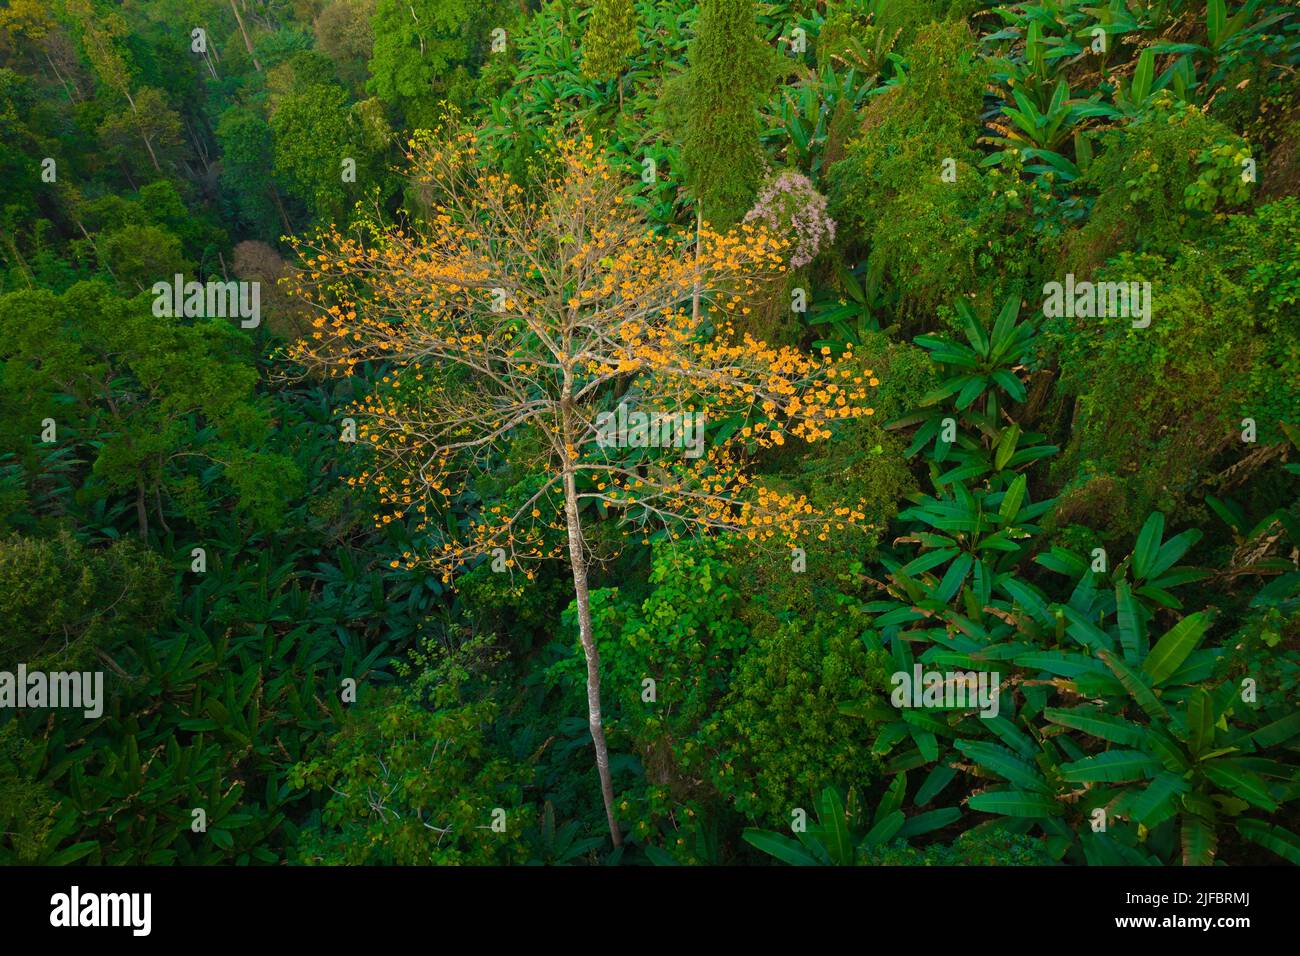 Aerial view of a young Pterocymbium macranthum tree in full blossom, Chiang dao rainforest, Thailand Stock Photo